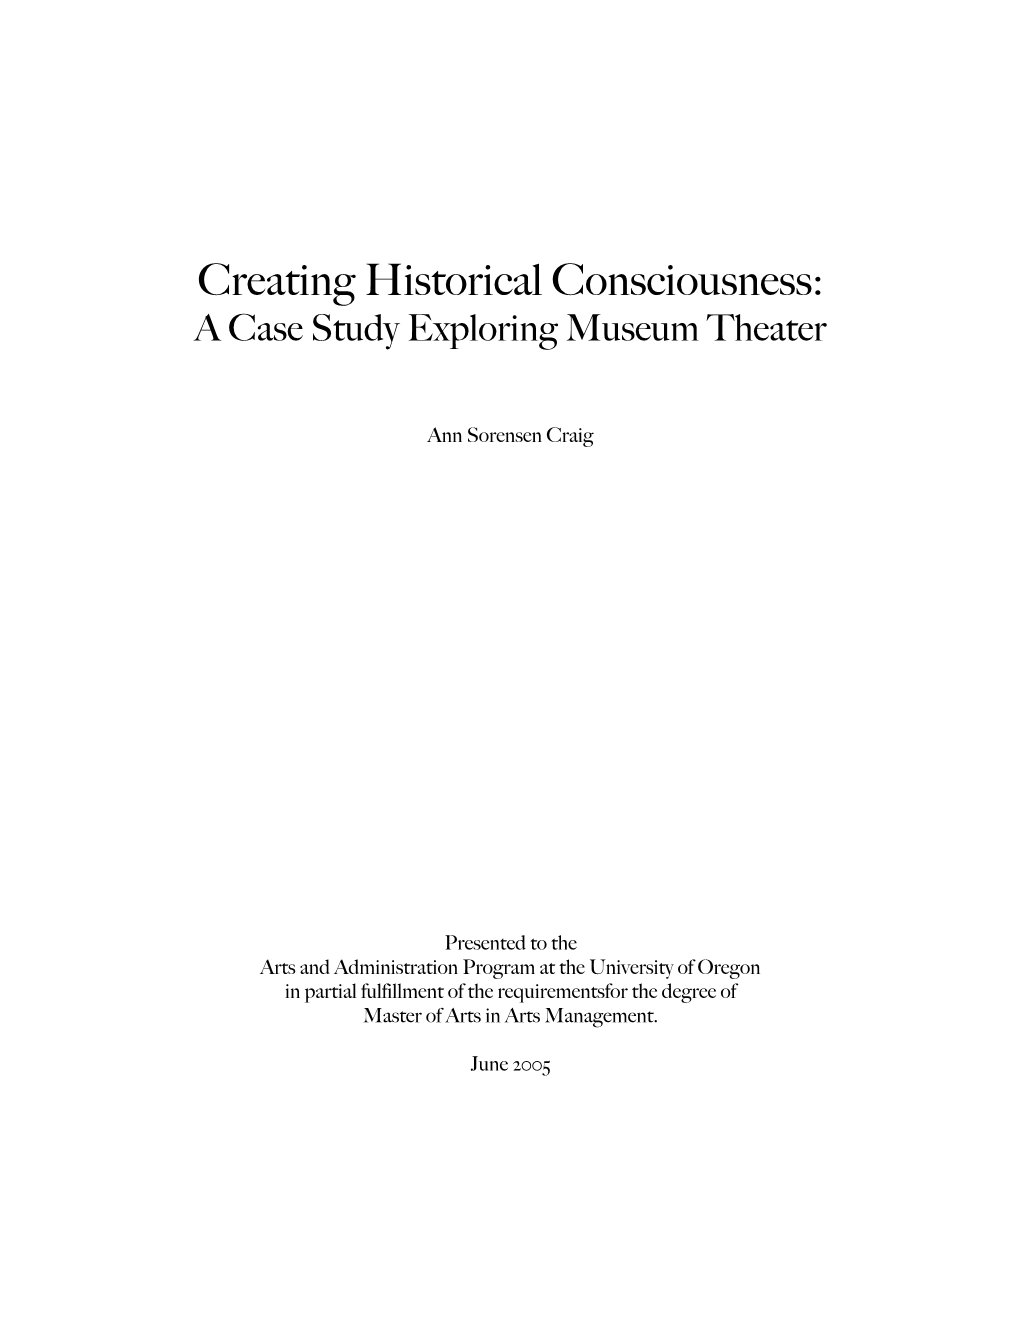 Creating Historical Consciousness: a Case Study Exploring Museum Theater